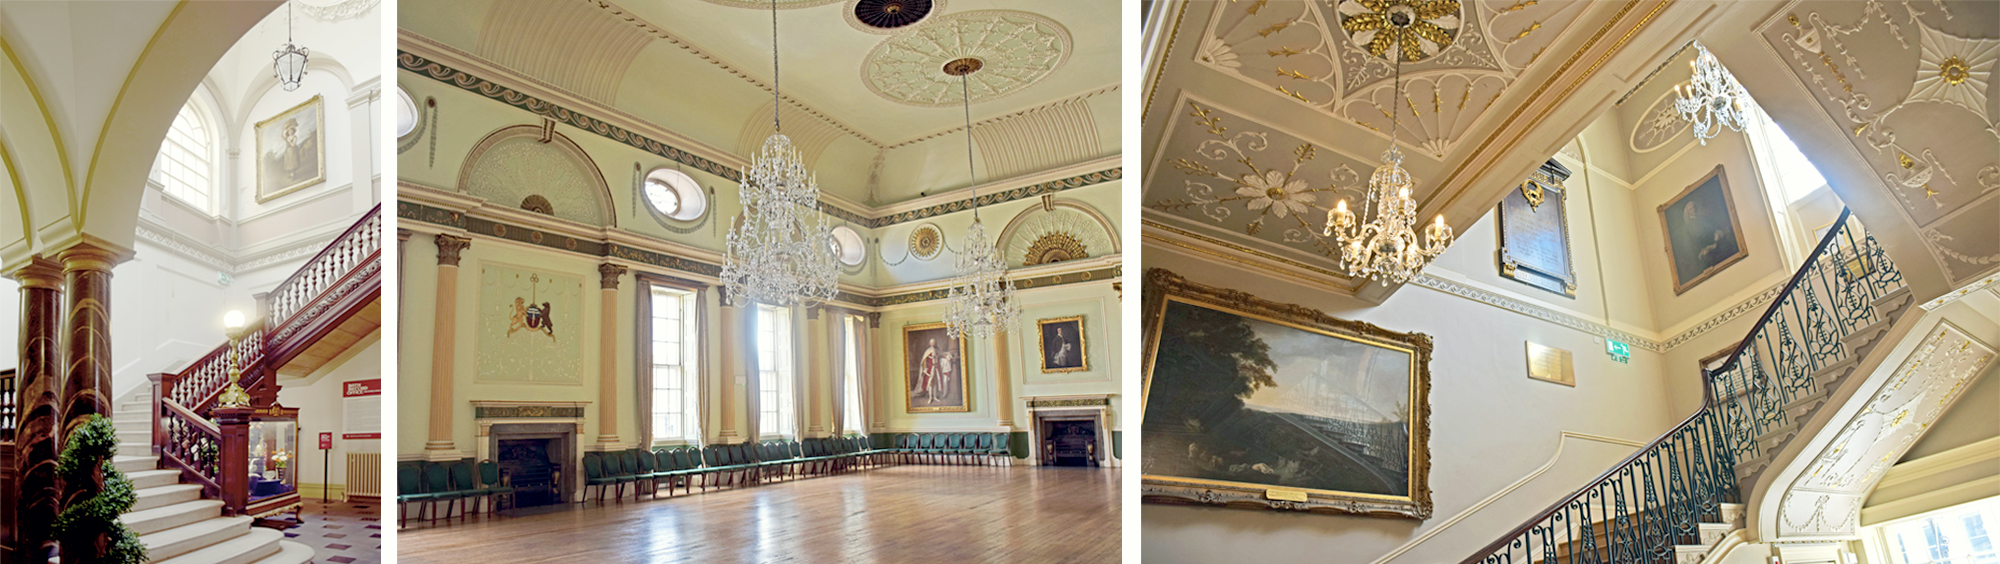 Photos of the interior of Bath's Guildhall